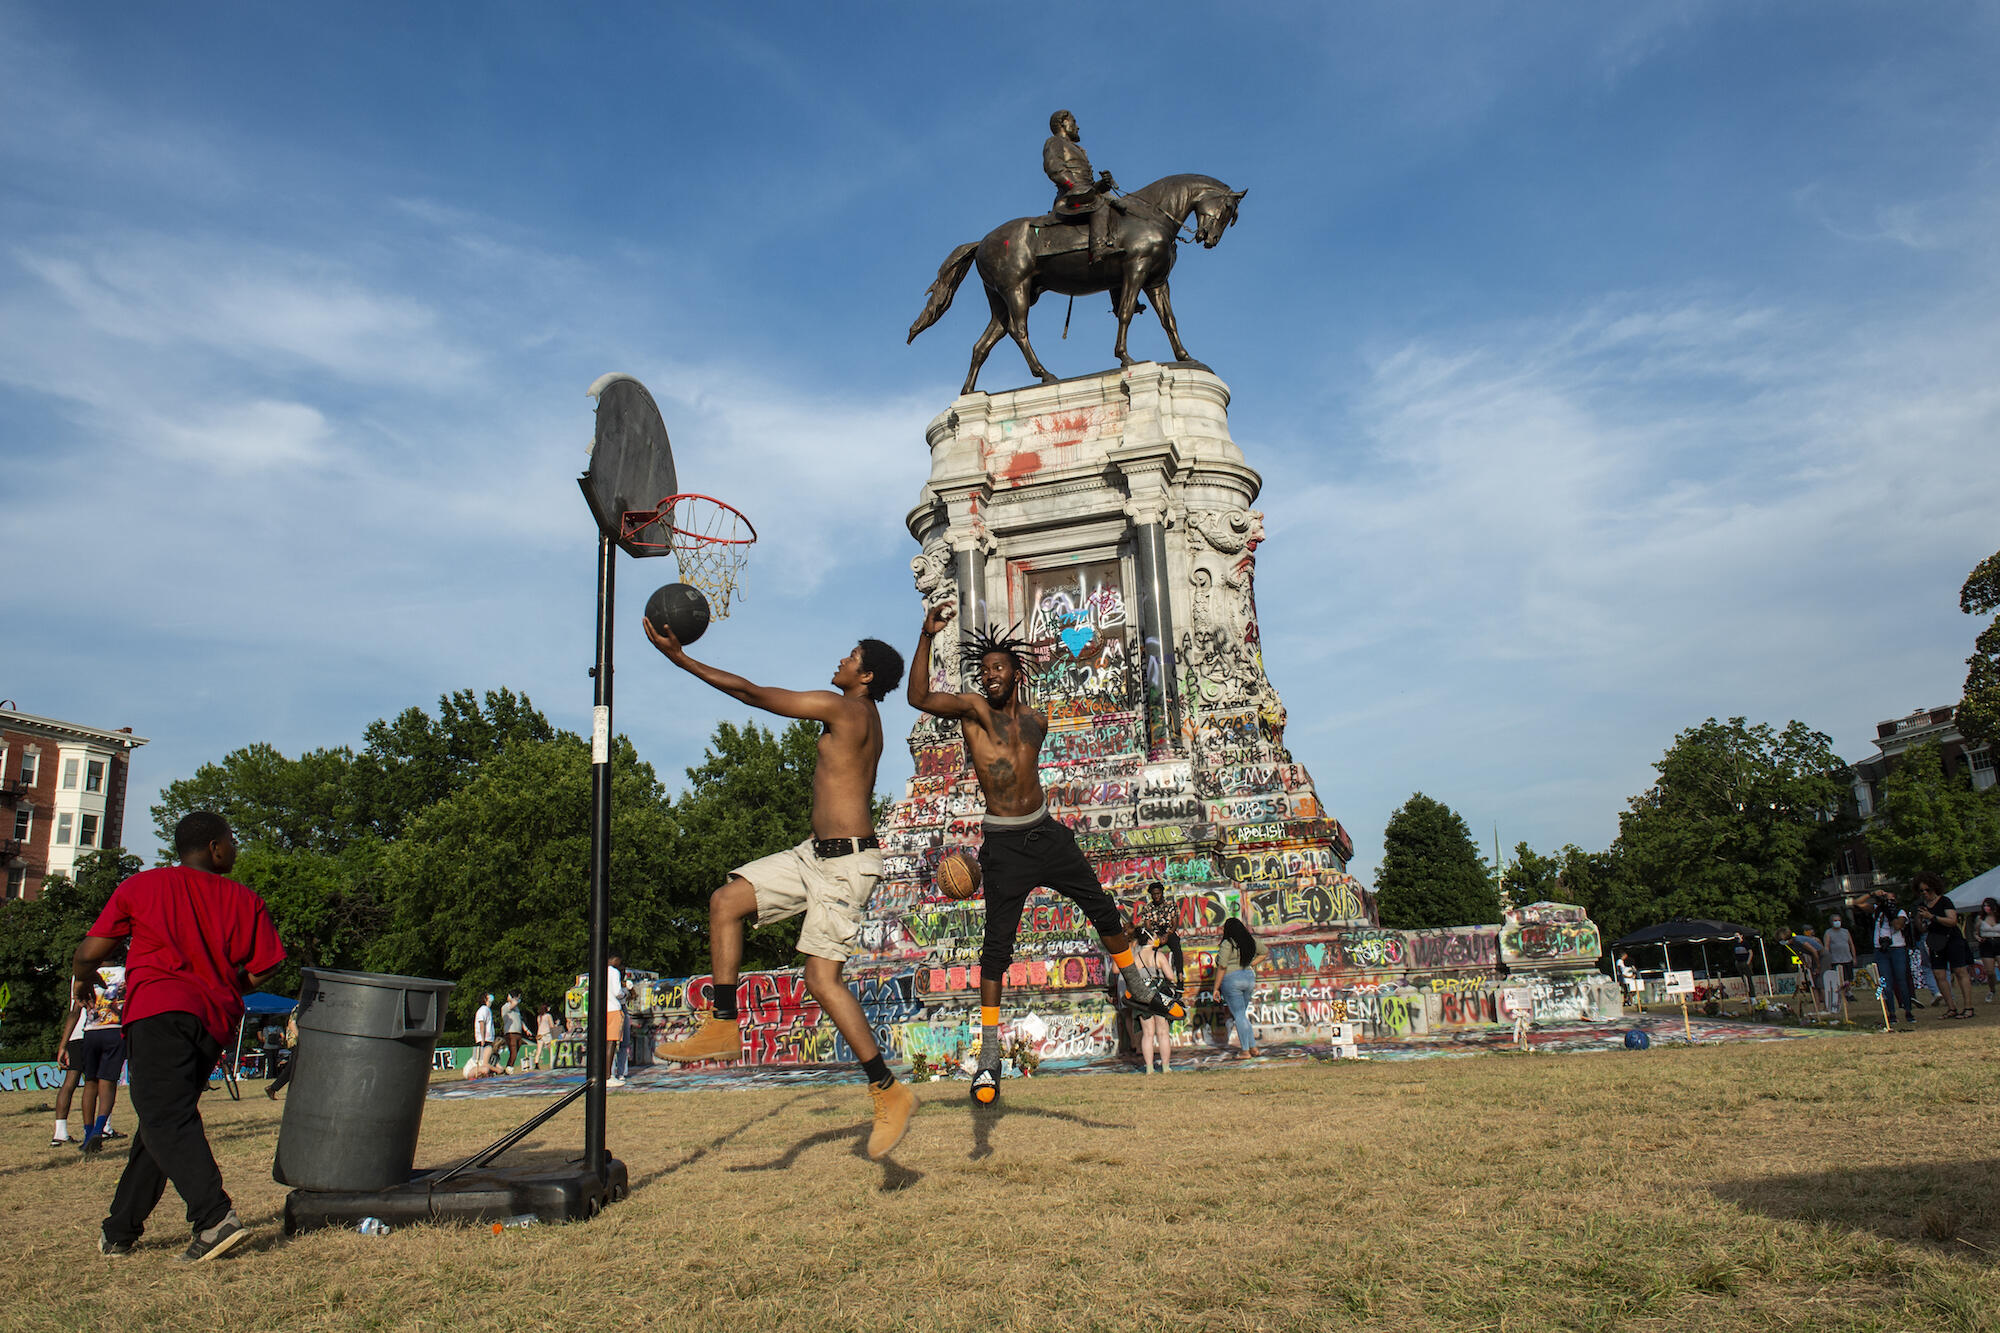 Young men playing basketball inside Marcus-David Peters Circle, with the graffiti-covered Robert E. Lee Memorial in the background.